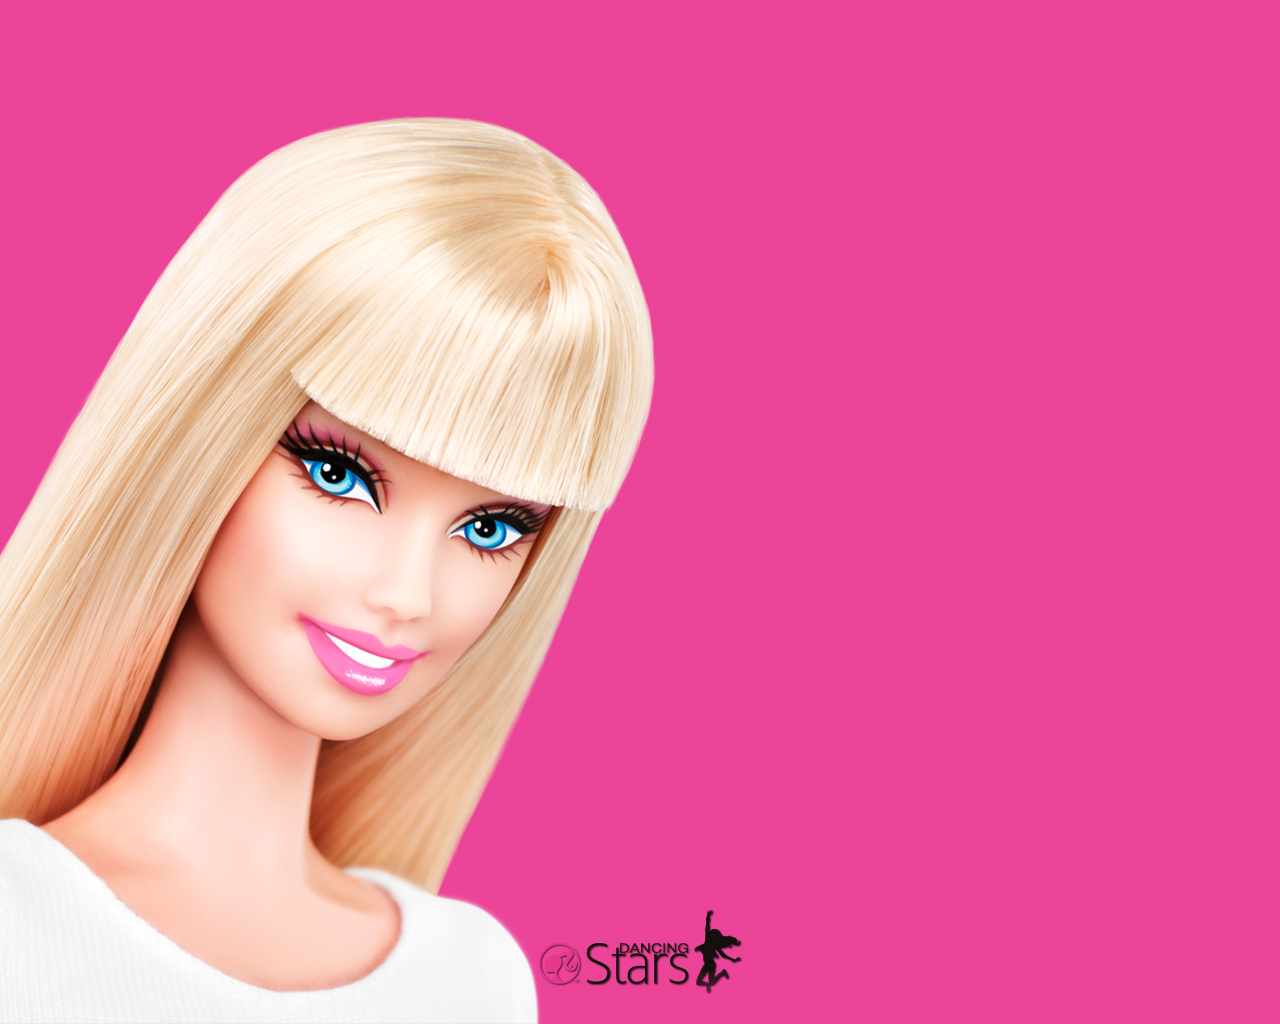 Free download Barbie Wallpaper 11 Wallpaper Background Hd With ...